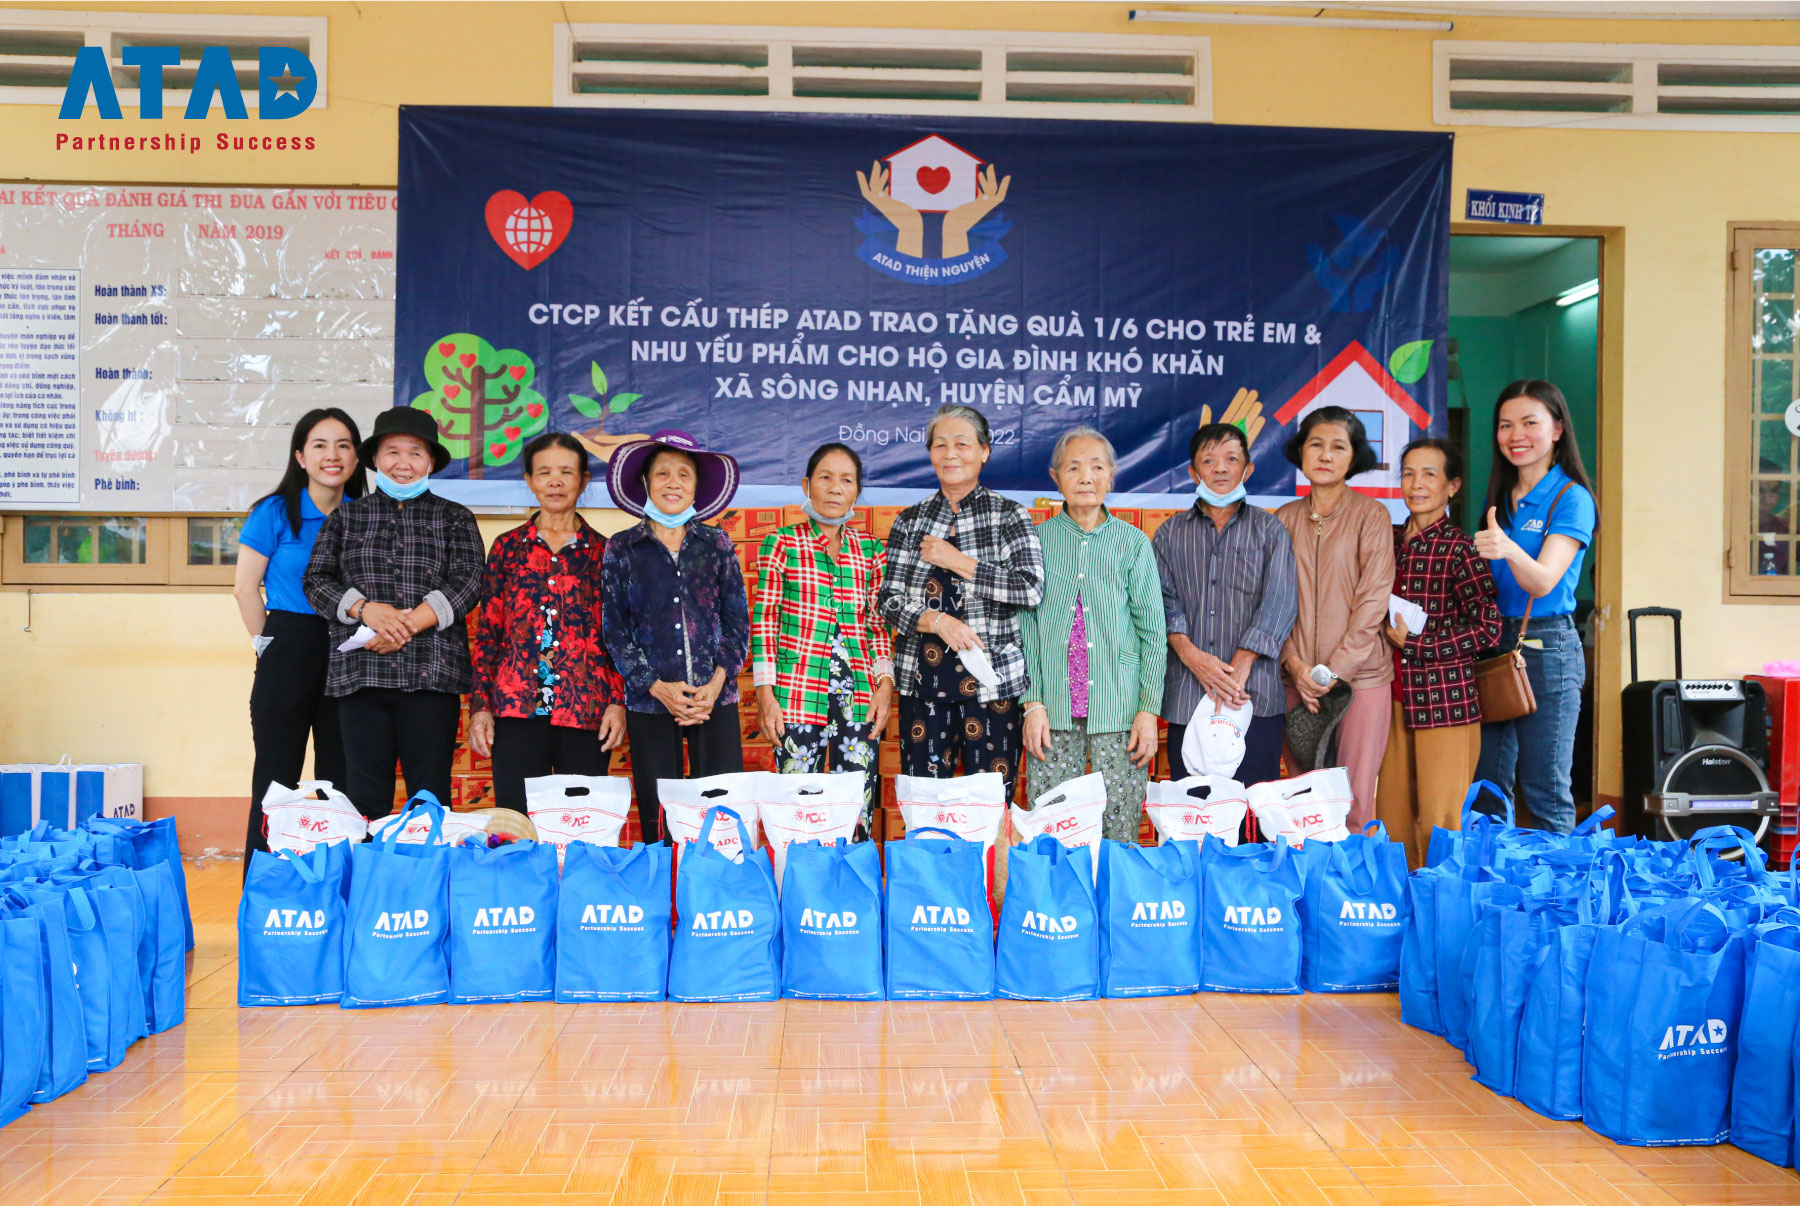 ATAD Presented Gifts For Children On International Children’s Day 1/6 & Necessities For Underprivileged Households Living In Song Nhan Village, Dong Nai Province 3